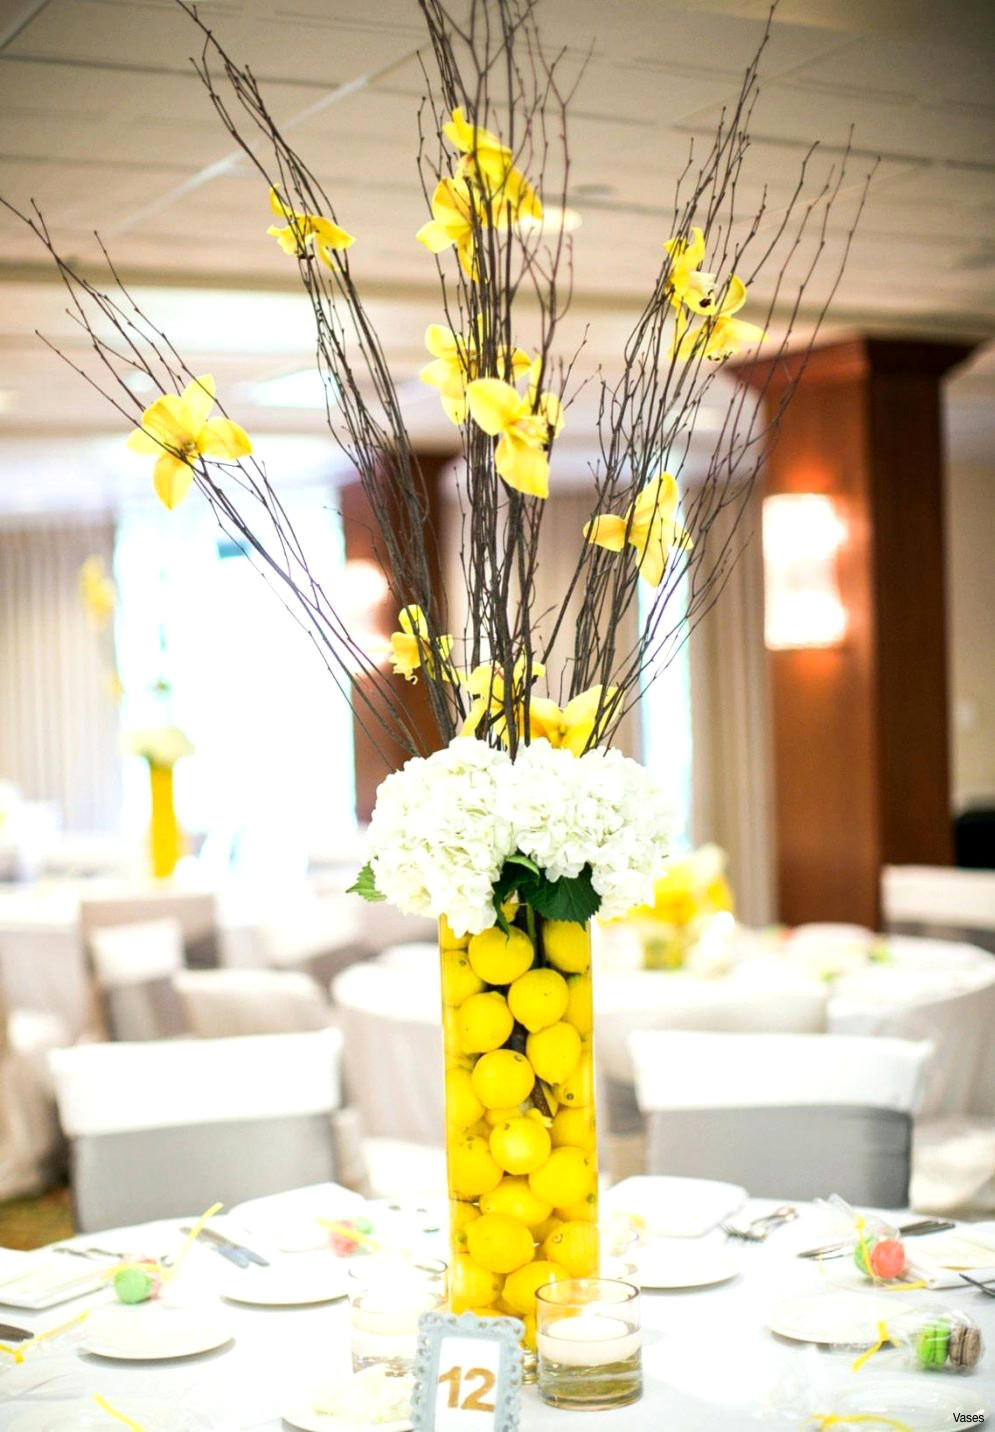 13 attractive Tall Vase Wedding Centerpiece Ideas 2024 free download tall vase wedding centerpiece ideas of decorations for weddings beautiful living room tall vase decor best with decorations for weddings fresh diy home decor vaseh vases decorative flower id